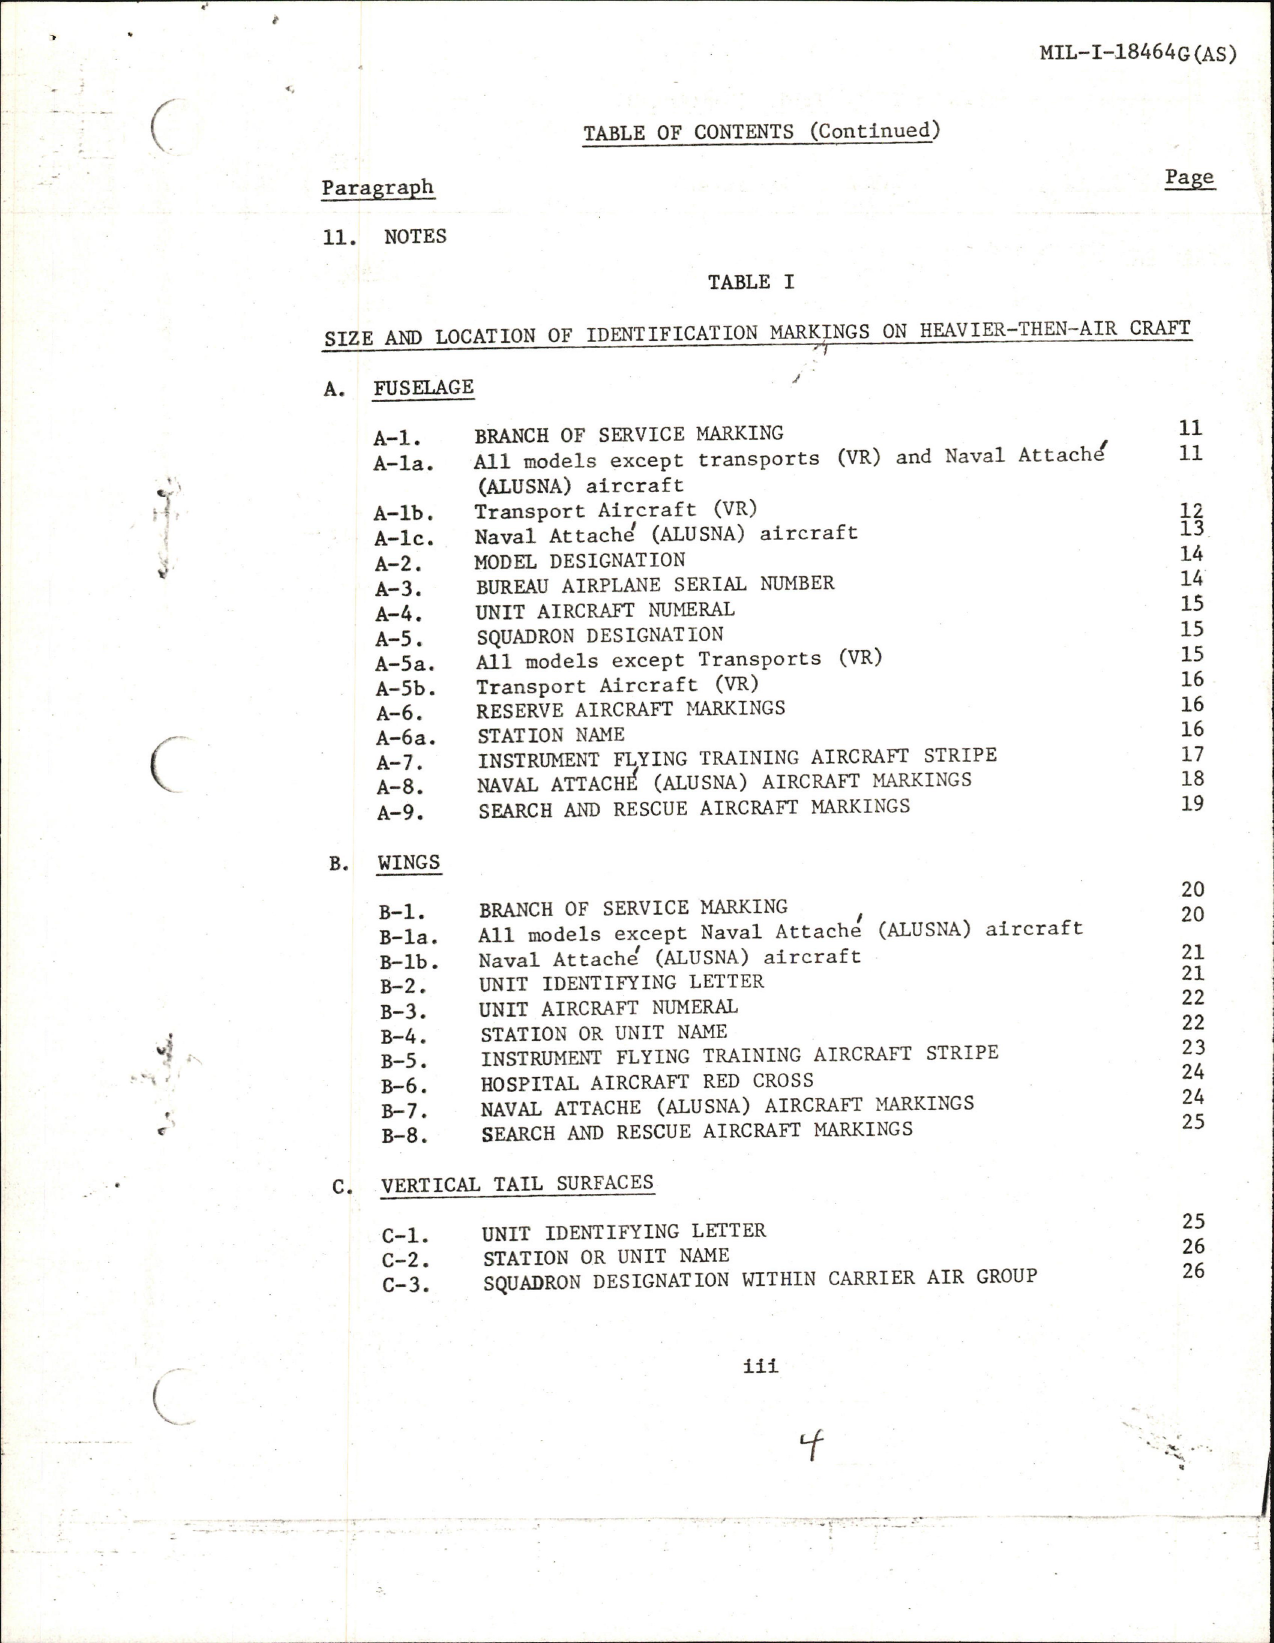 Sample page 6 from AirCorps Library document: Military Specifications for Insignia and Marking for Naval Weapons Systems 